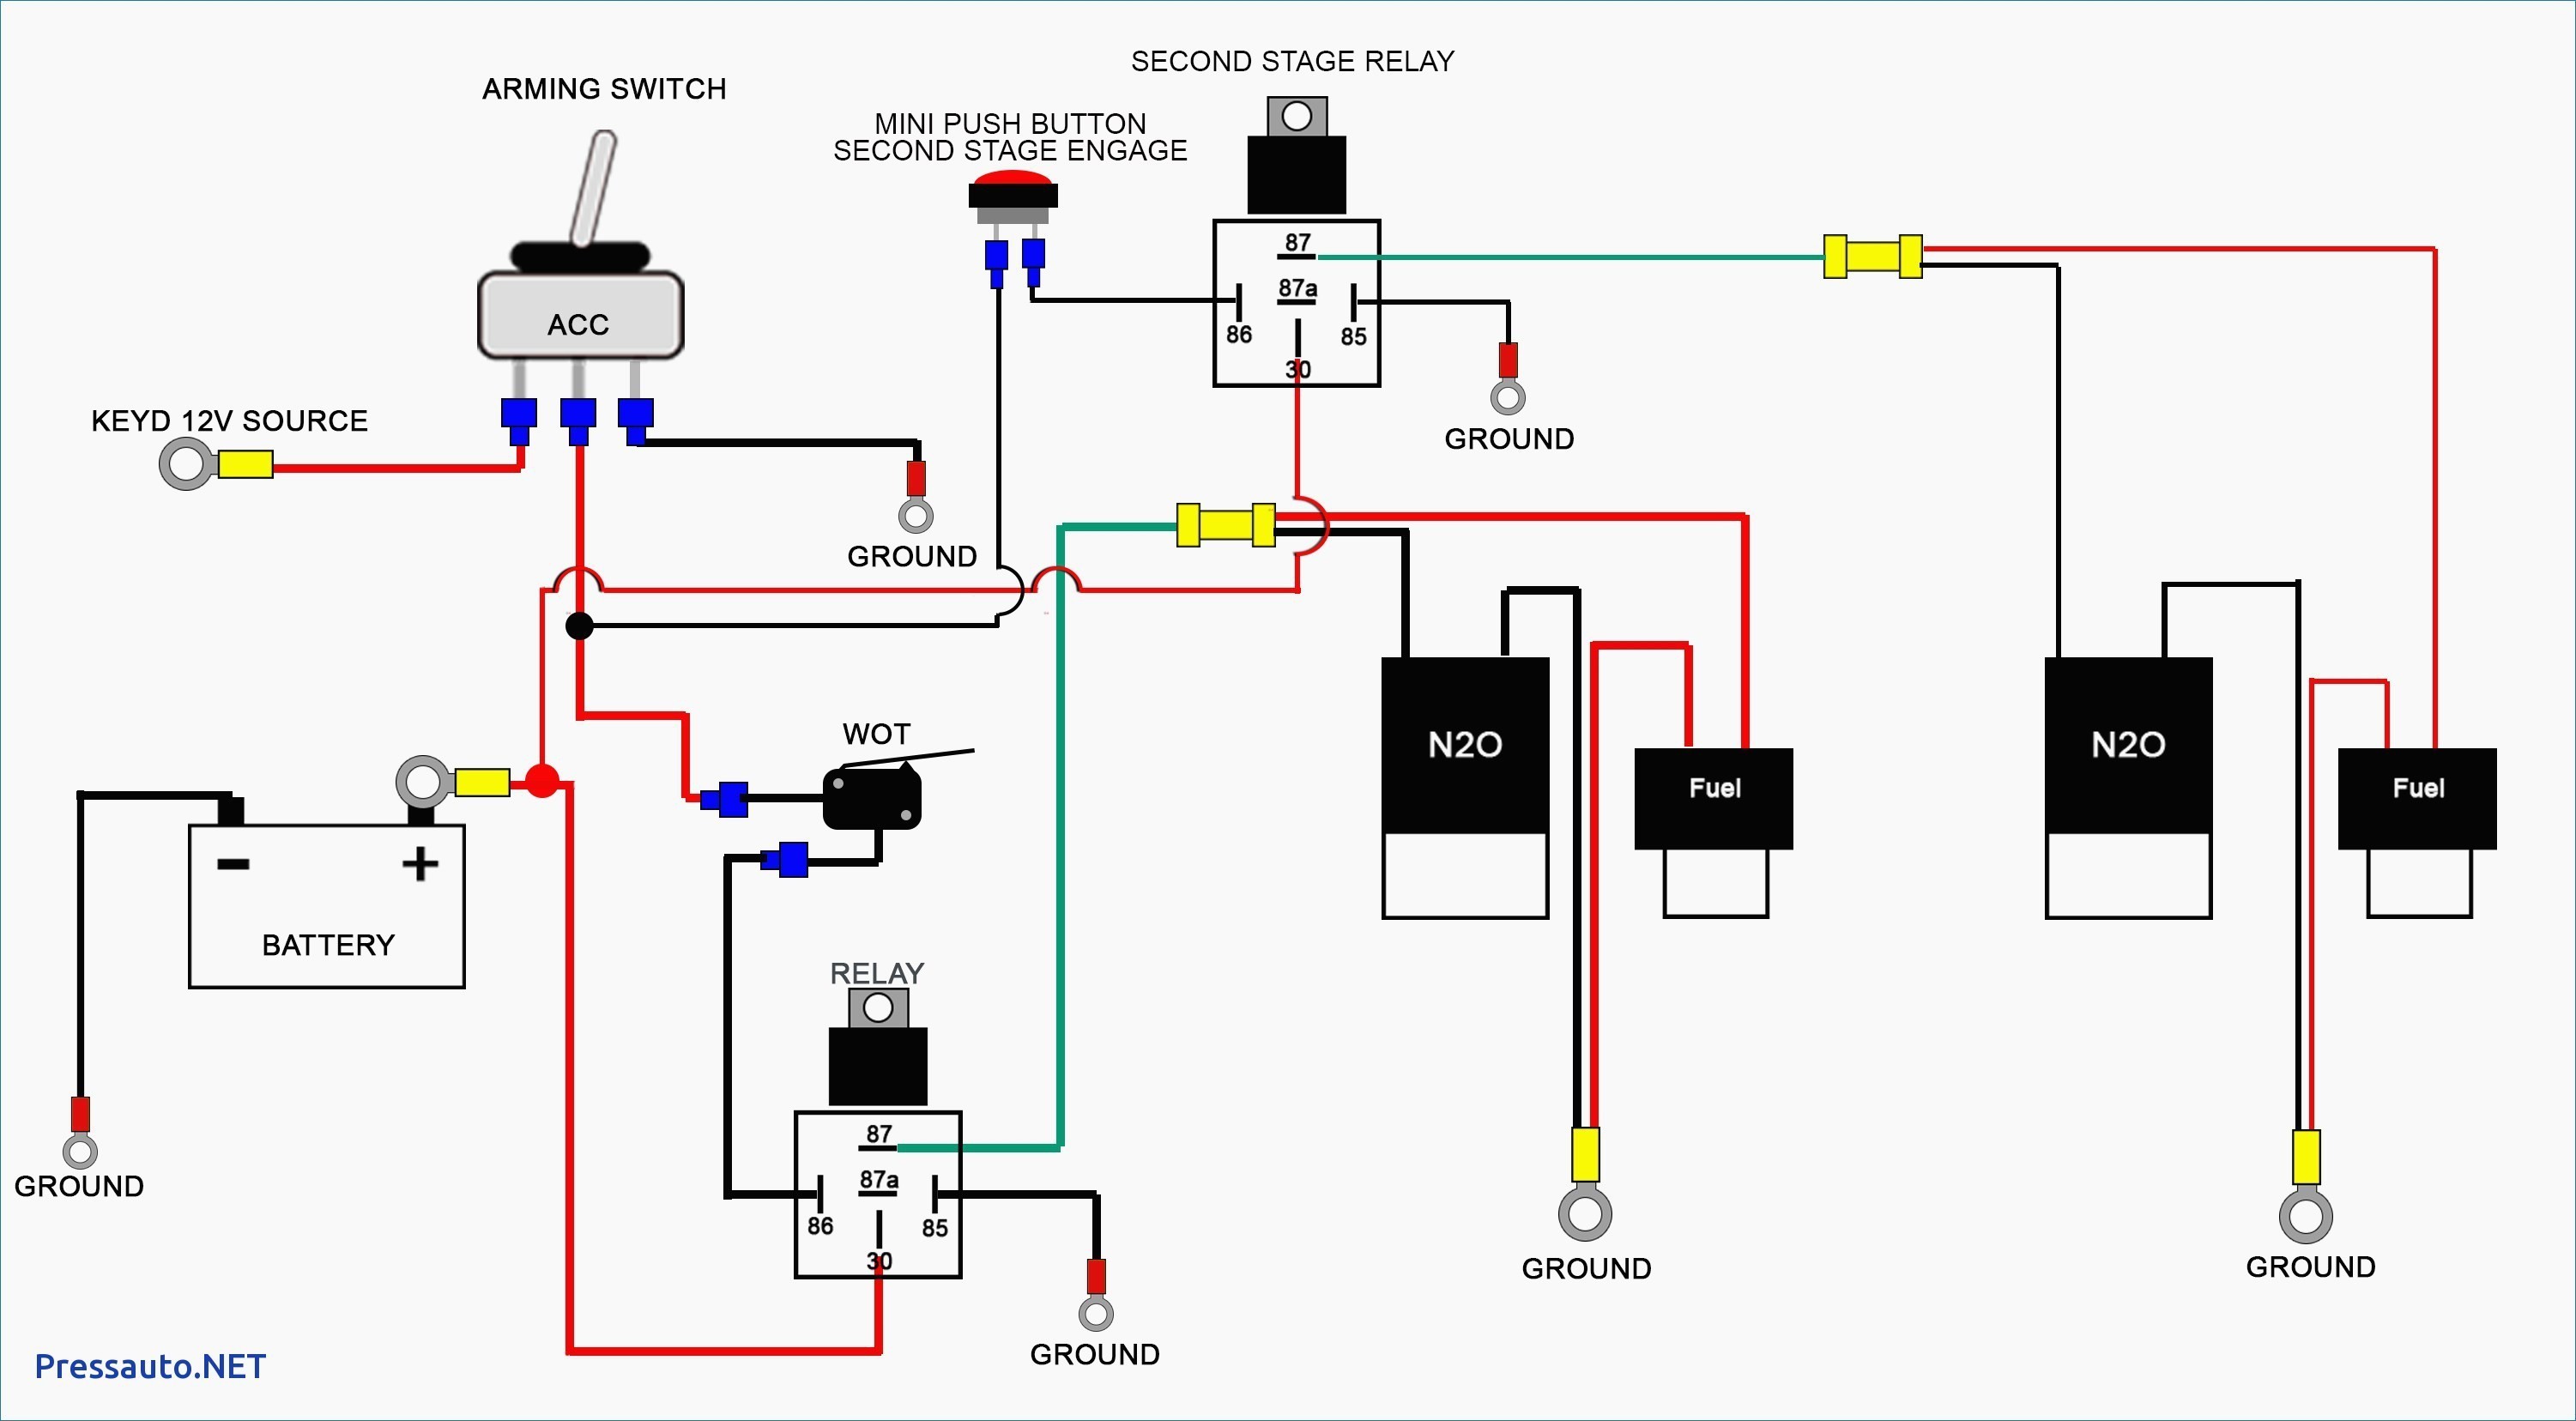 Wiring Diagram 12v isolator Switch Save Second Battery Wiring Diagram Car Refrence Battery isolator Wiring